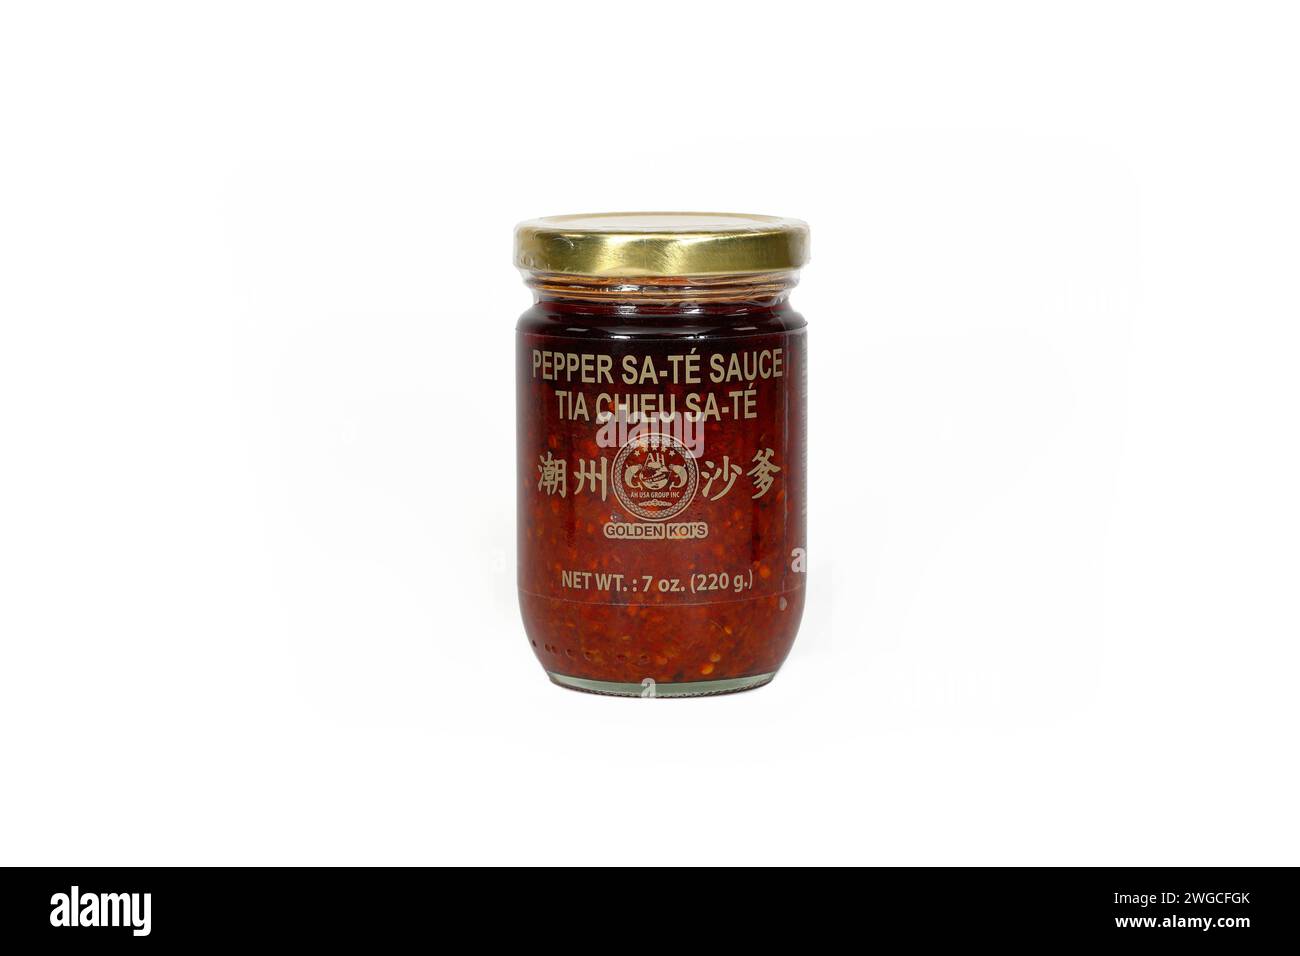 A jar of Golden Koi's Pepper Tia Chieu Sa-te Sauce 潮州沙爹 Teochew satay sauce, Chiuchow barbeque sauce, isolated on a white background. Stock Photo